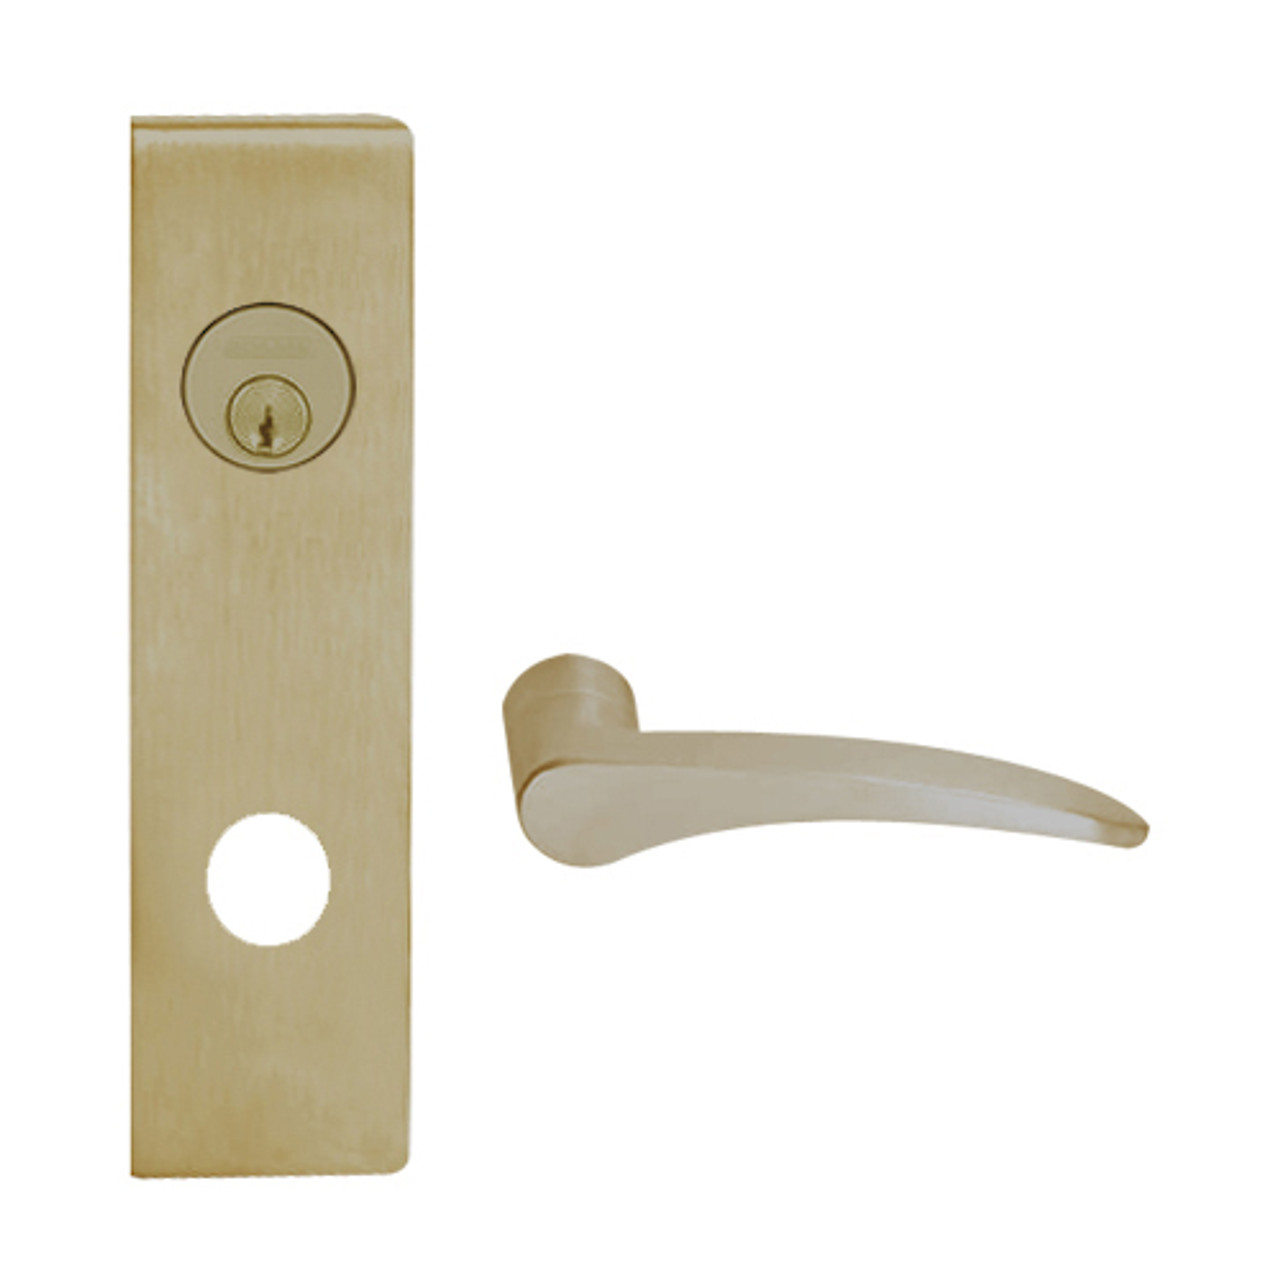 L9050L-12N-613-LH Schlage L Series Less Cylinder Entrance Commercial Mortise Lock with 12 Cast Lever Design in Oil Rubbed Bronze